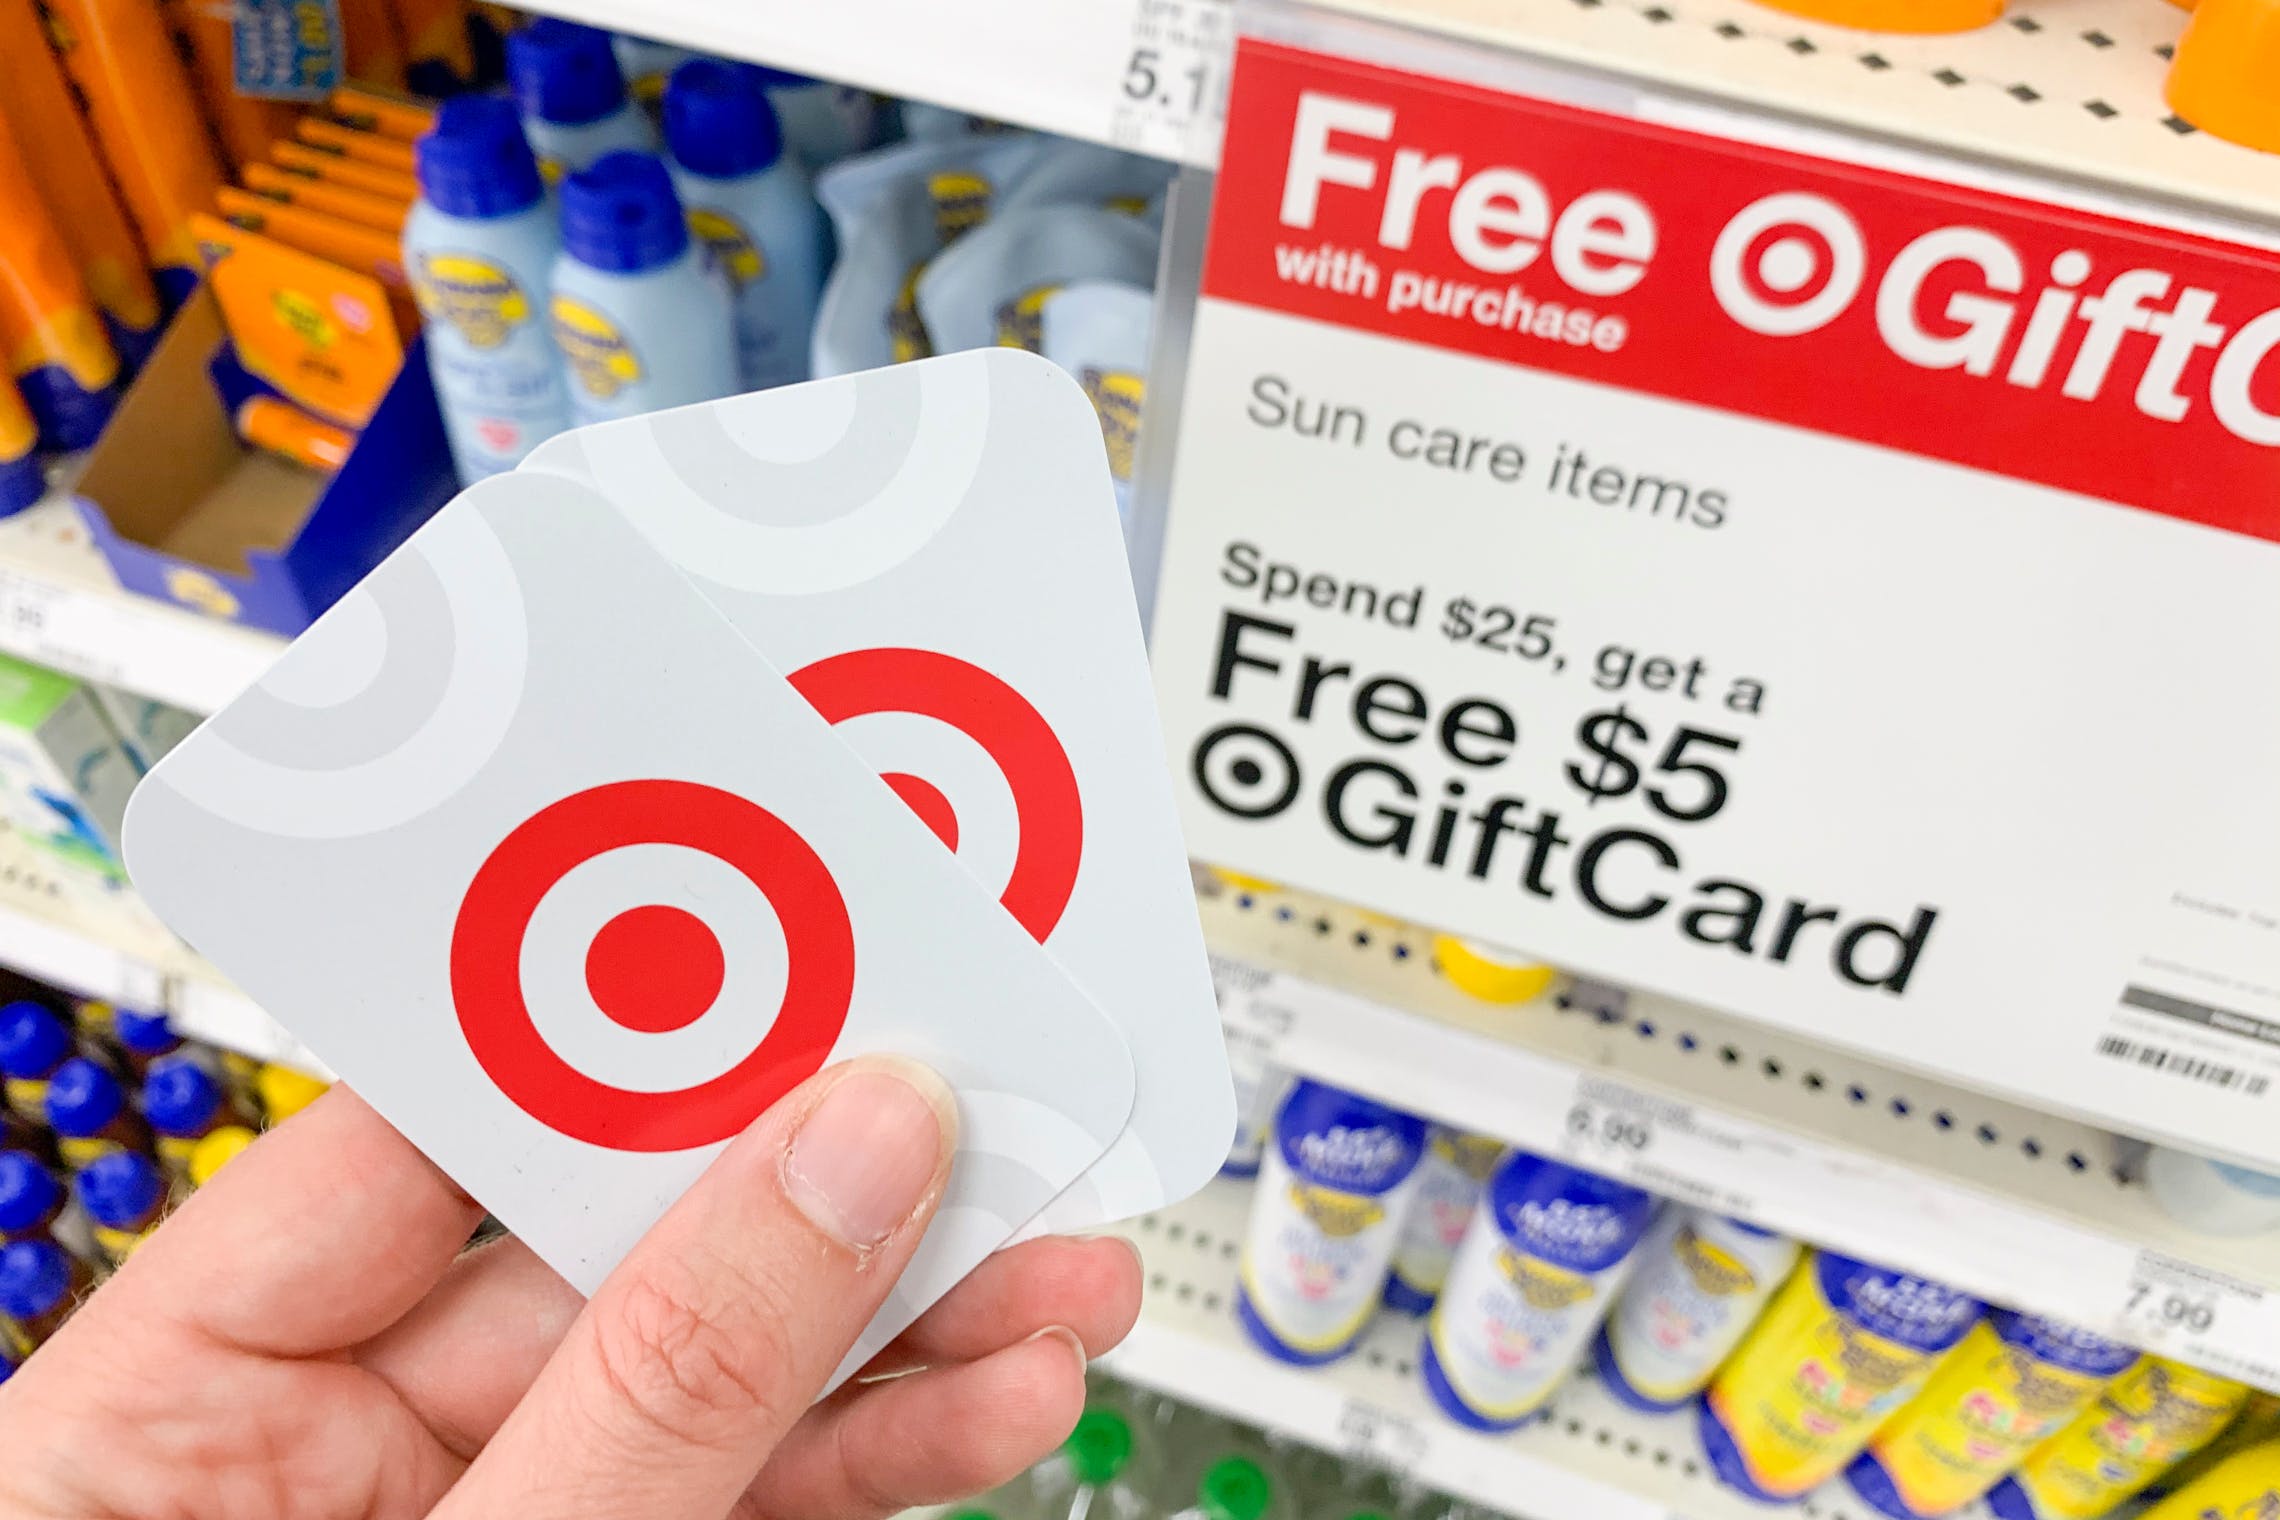 Where can you use a target gift card